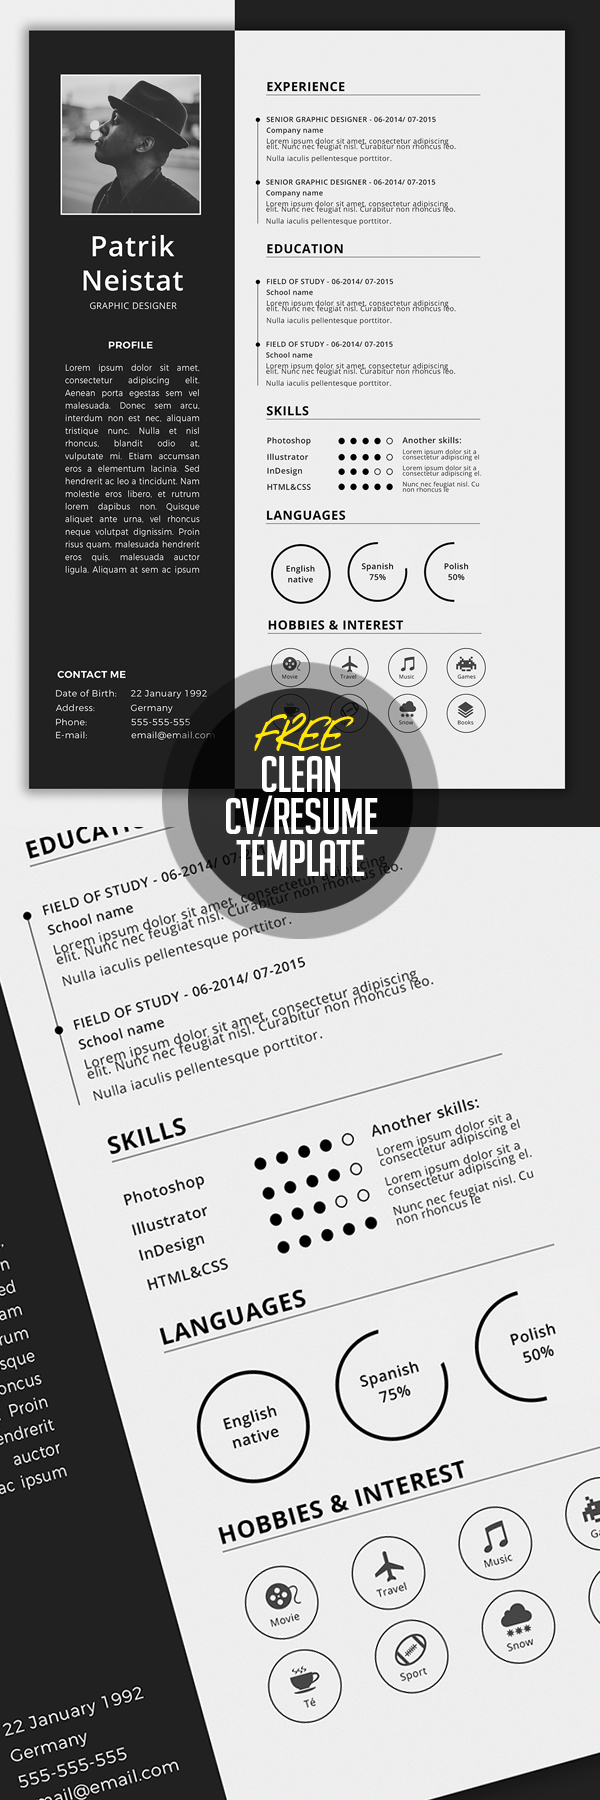 50 Free Resume Templates: Best Of 2018 -  49